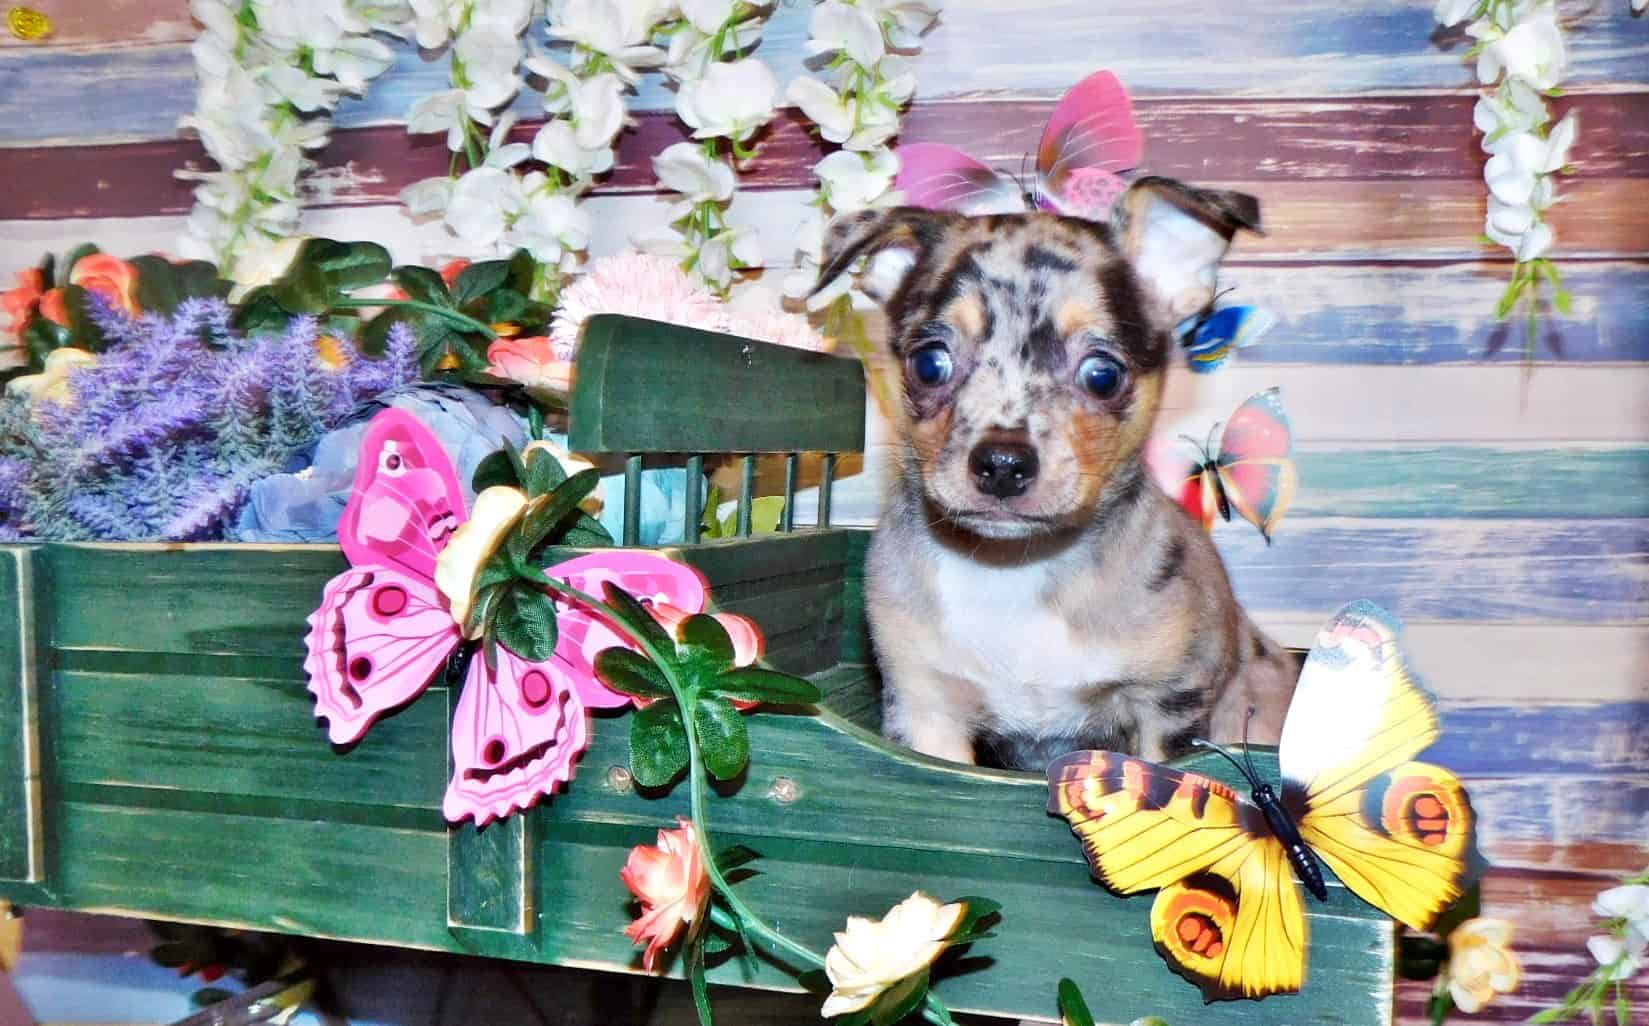 Prince – Bubbly and Outgoing Black/Tan Merle Baby